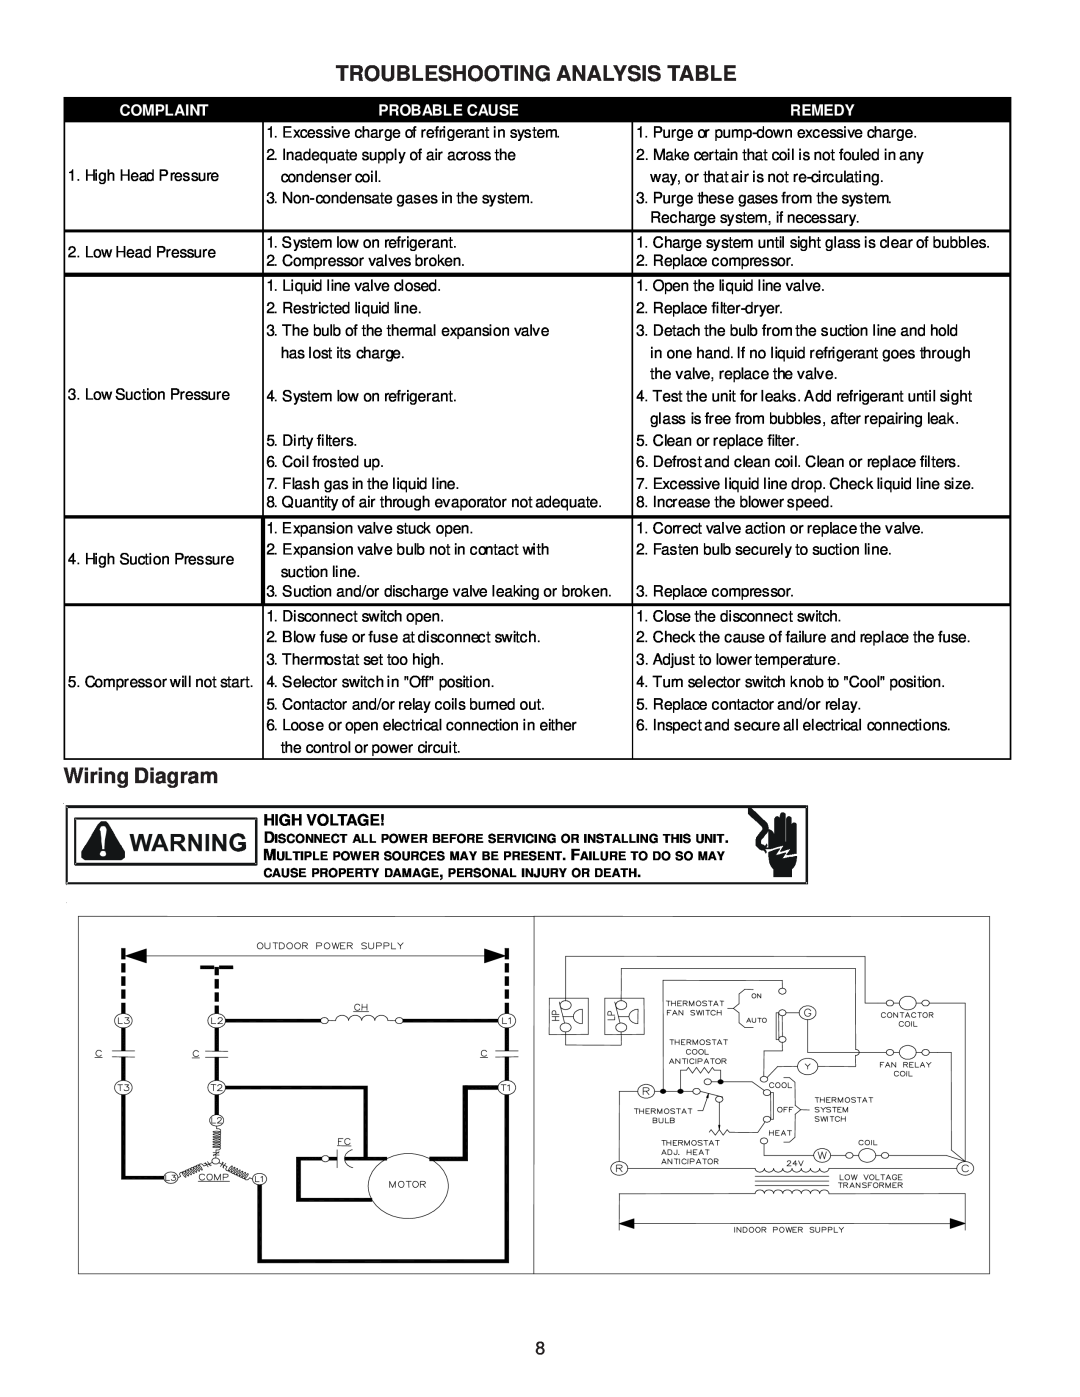 Goodman Mfg IO-402G Troubleshooting Analysis Table, Wiring Diagram, Complaint, Probable Cause, Remedy 